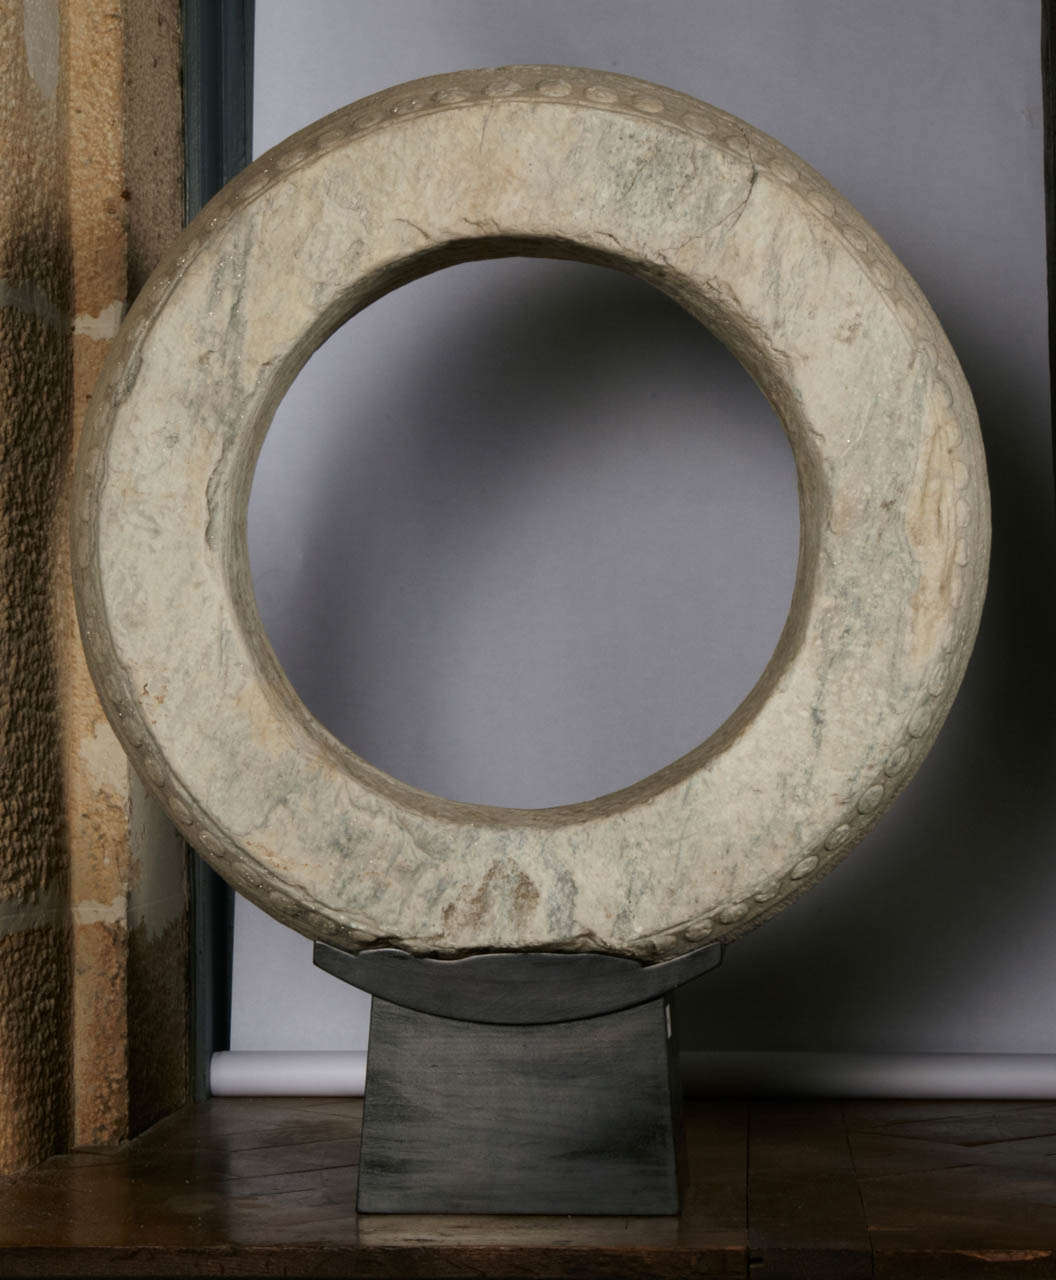 Very contemporary look for this round Chinese window frame in white marble on a black wooden base.